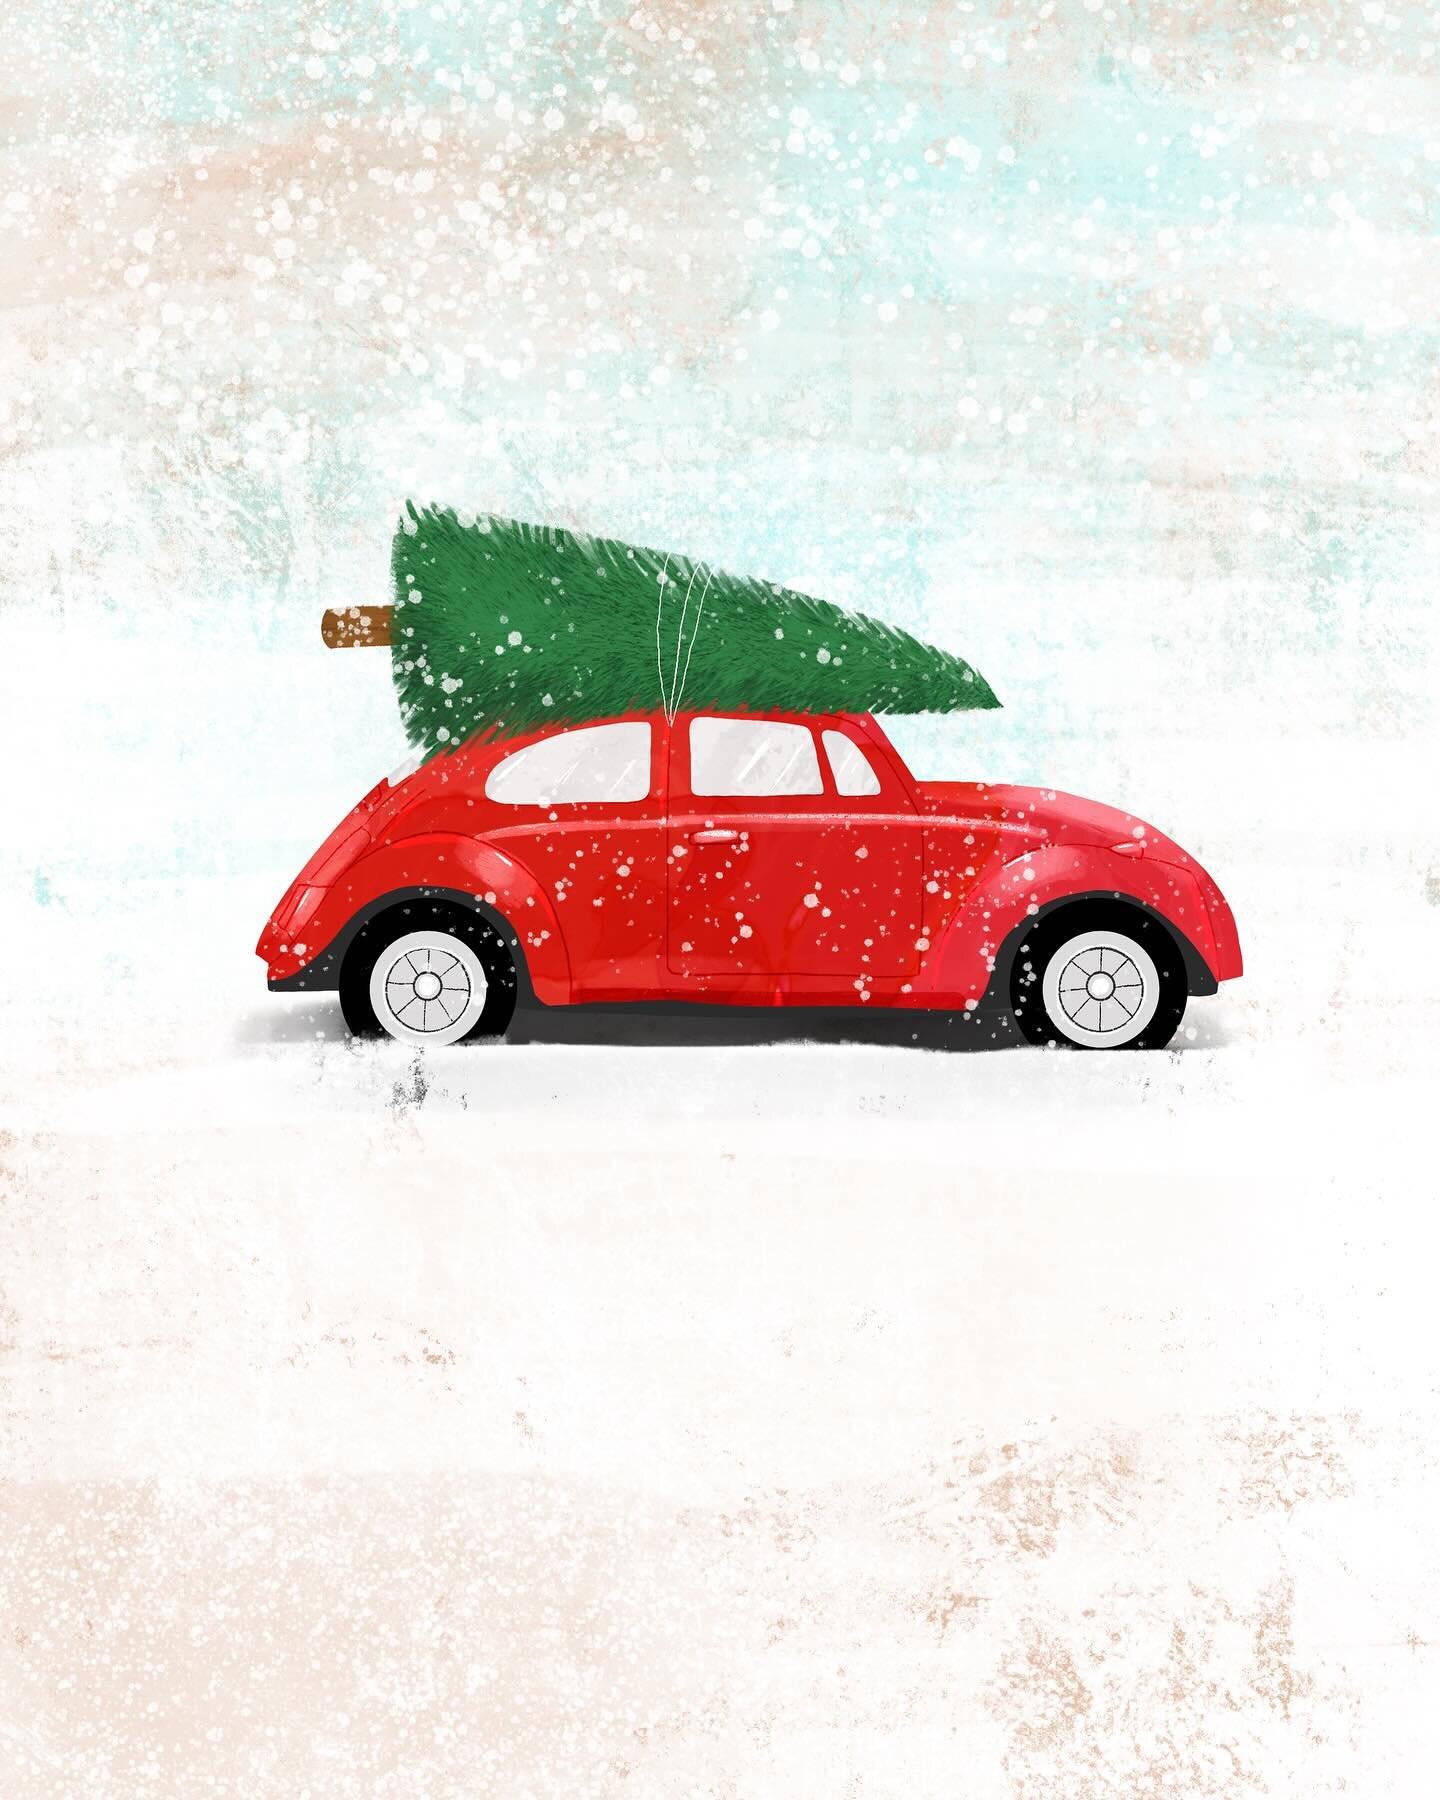 I managed to do a little holiday piece. Can&rsquo;t quite believe it!

🚗🌲

#gettingthechristmastree #christmastreeonacar #redvwbeetle #christmasart #christmasartwork #christmasillustration #holidayillustration